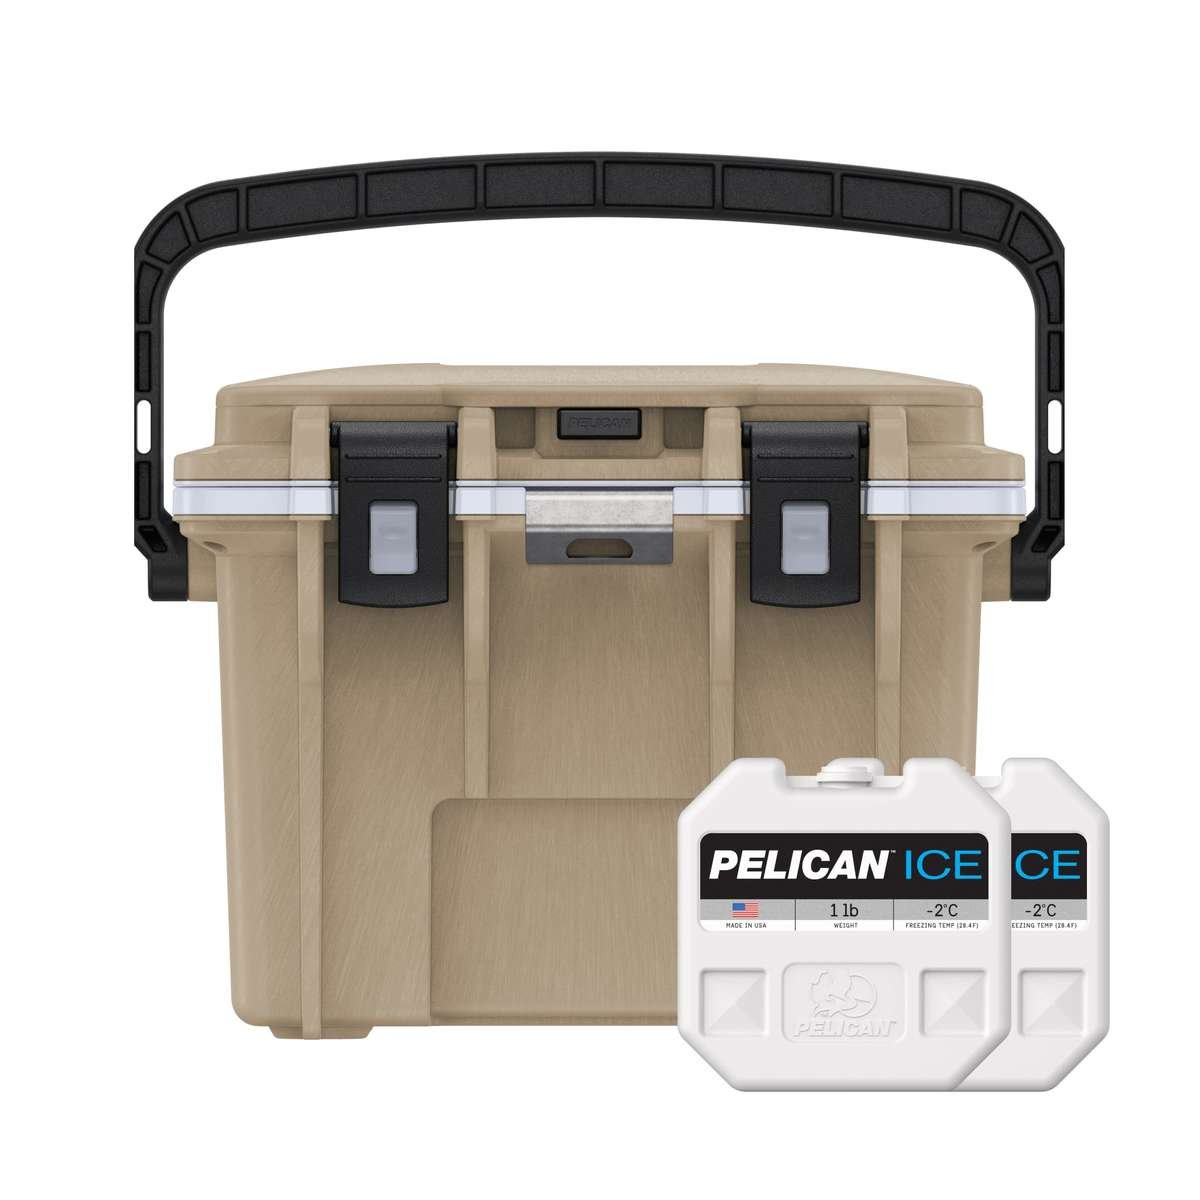 14QT CoolTan/White Personal Cooler with two free 1lb Pelican Ice packs